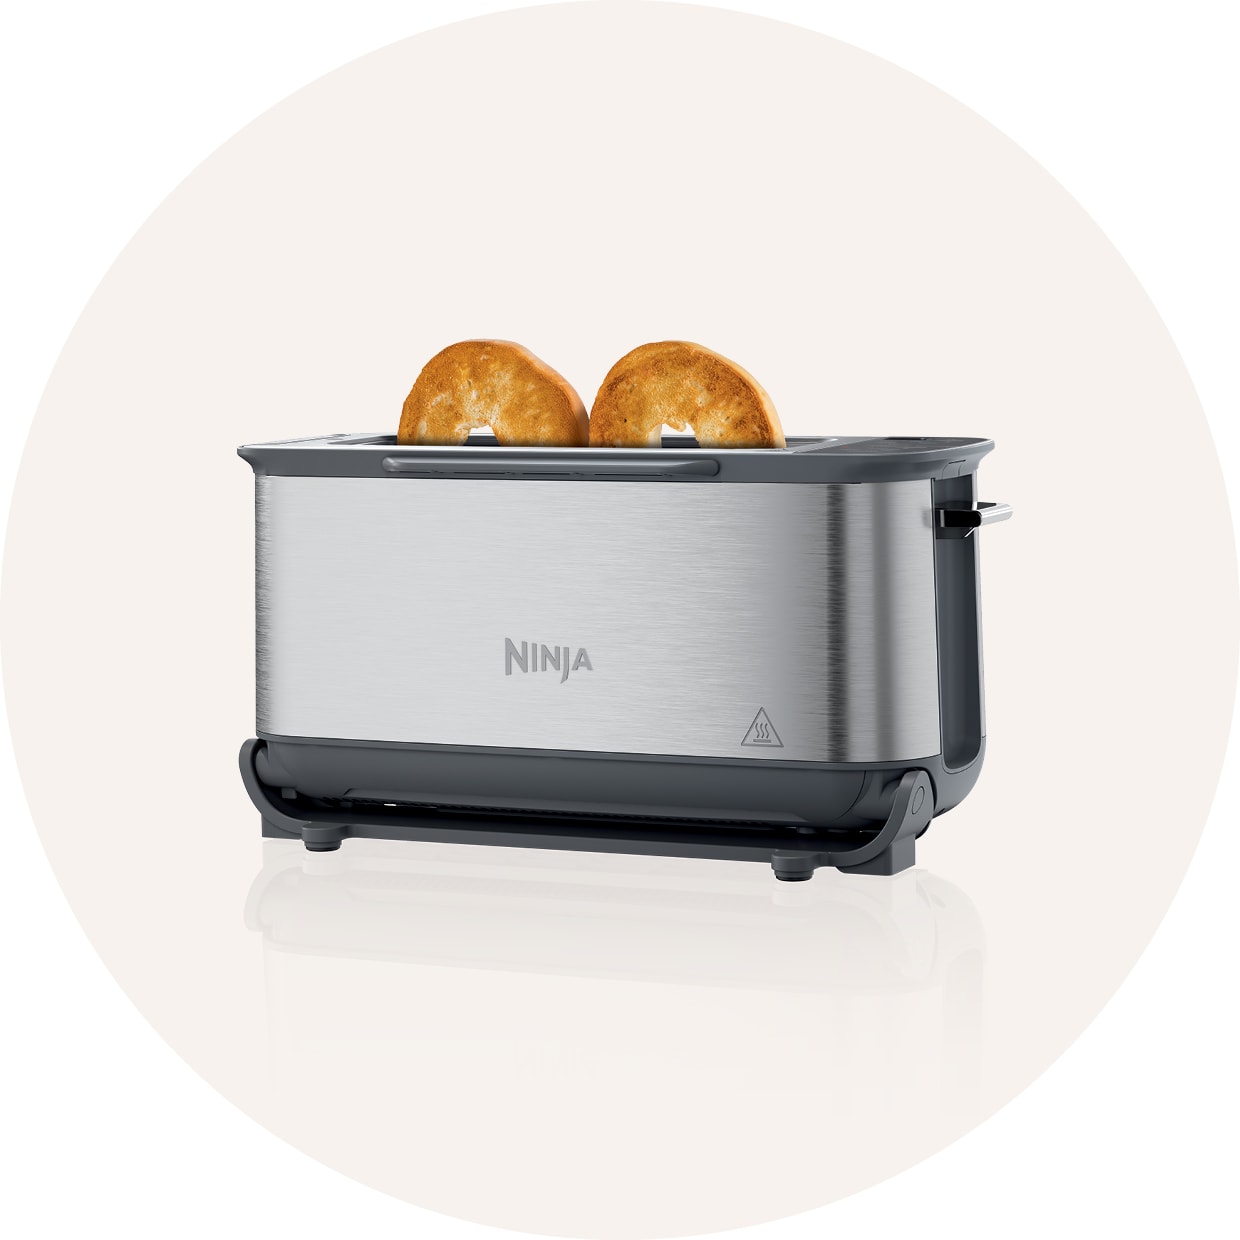 Ninja – Kitchen Appliances For The Food You Love